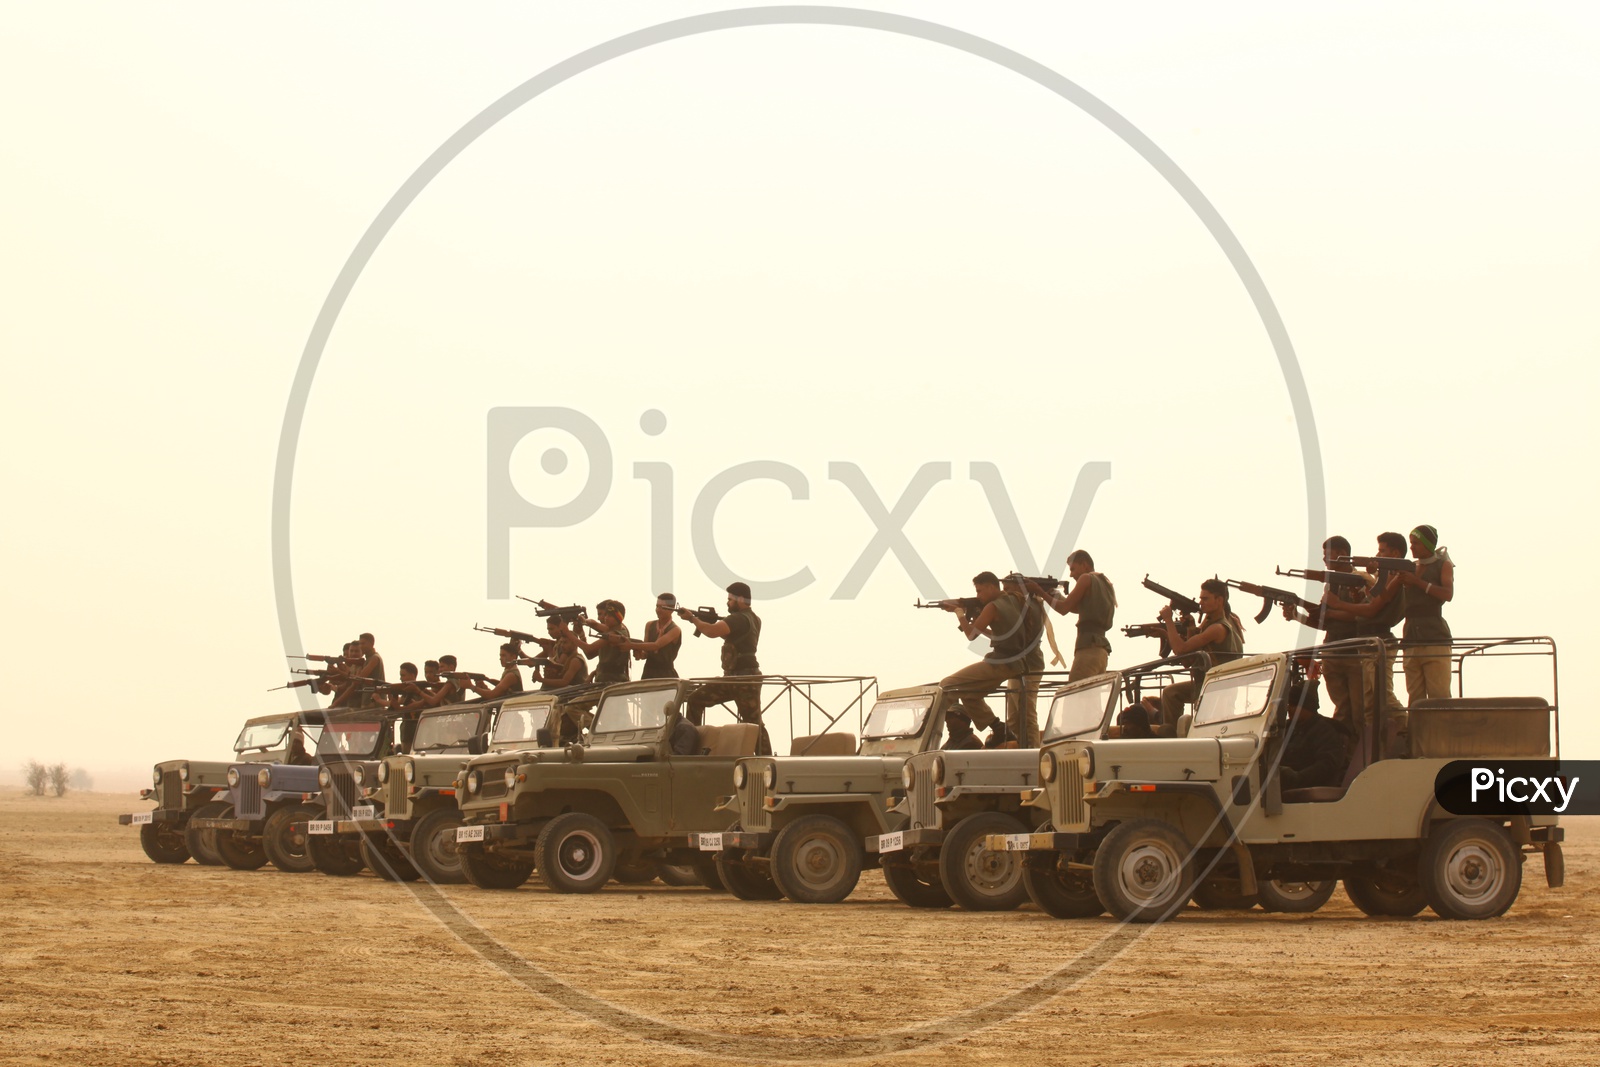 group of people with guns on the vehicles in a desert,  bandits